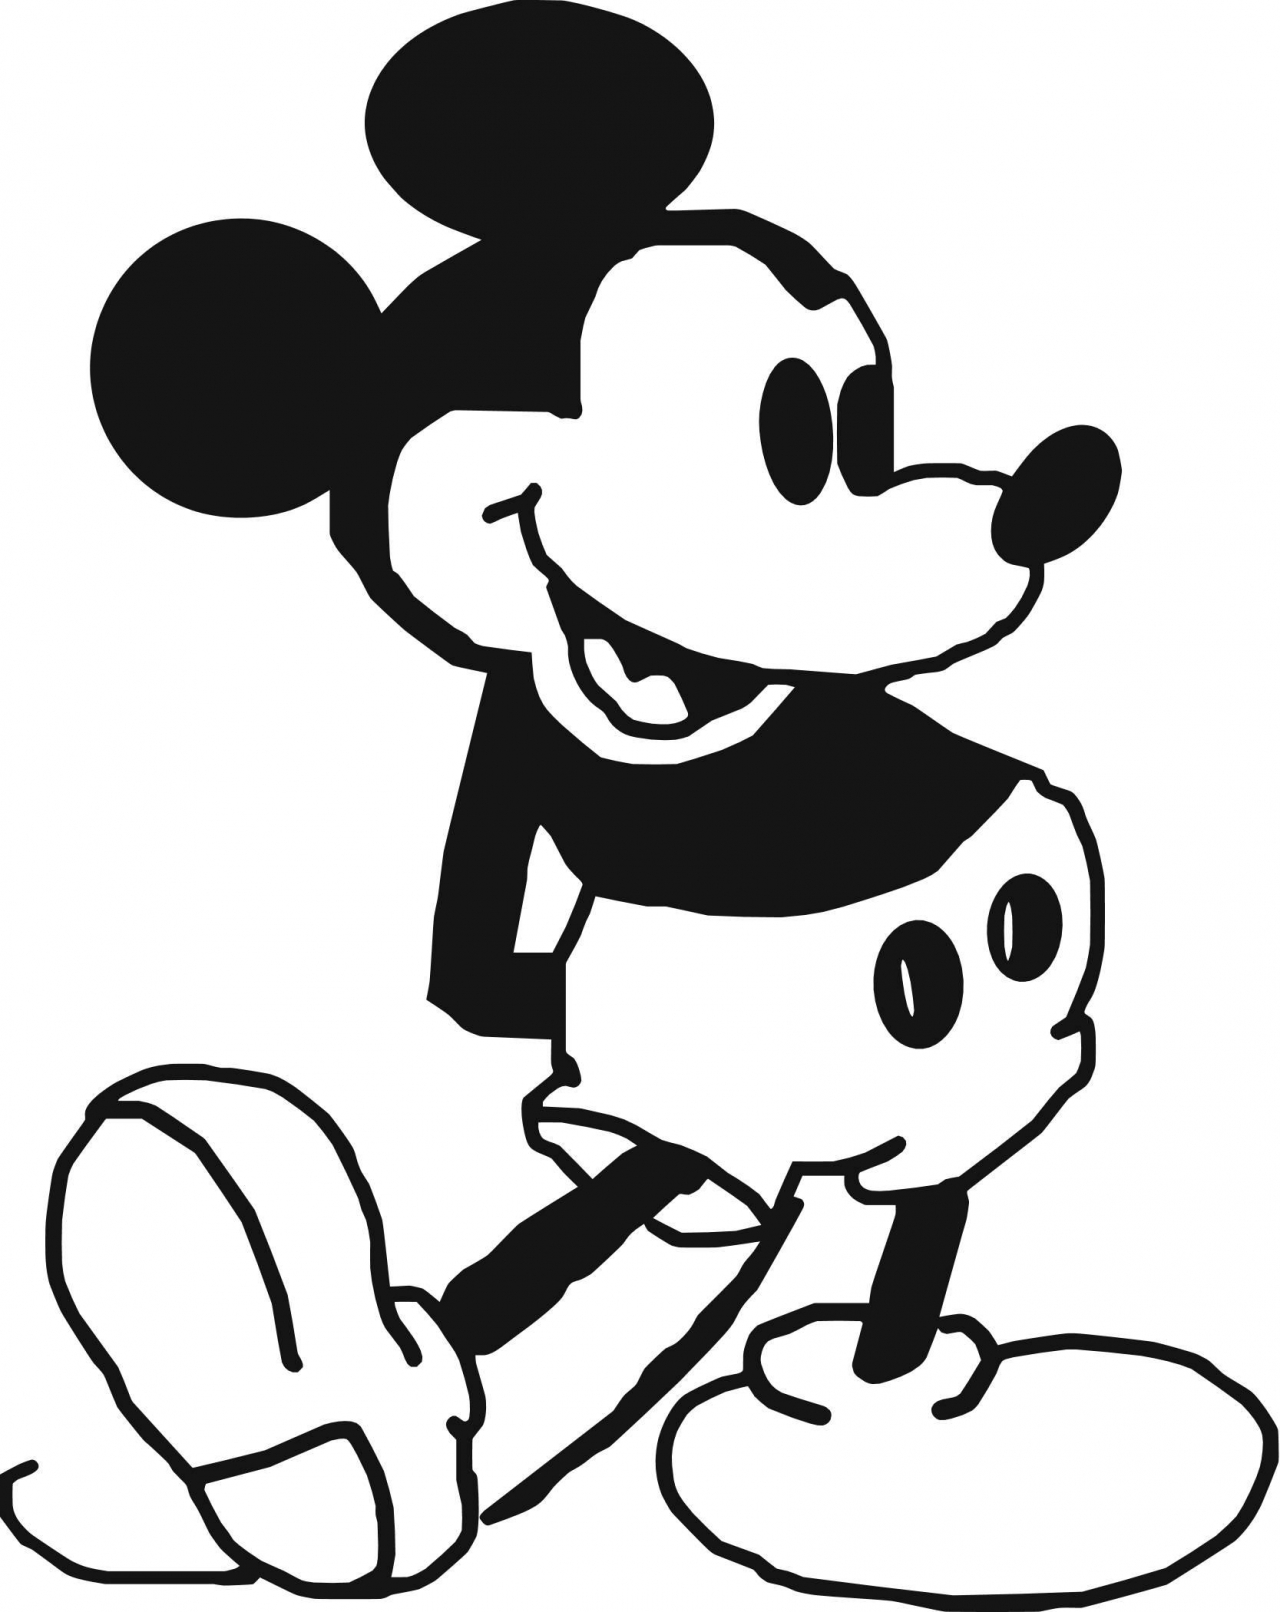 Black And White Mickey Mouse Cartoons   Clipart Best